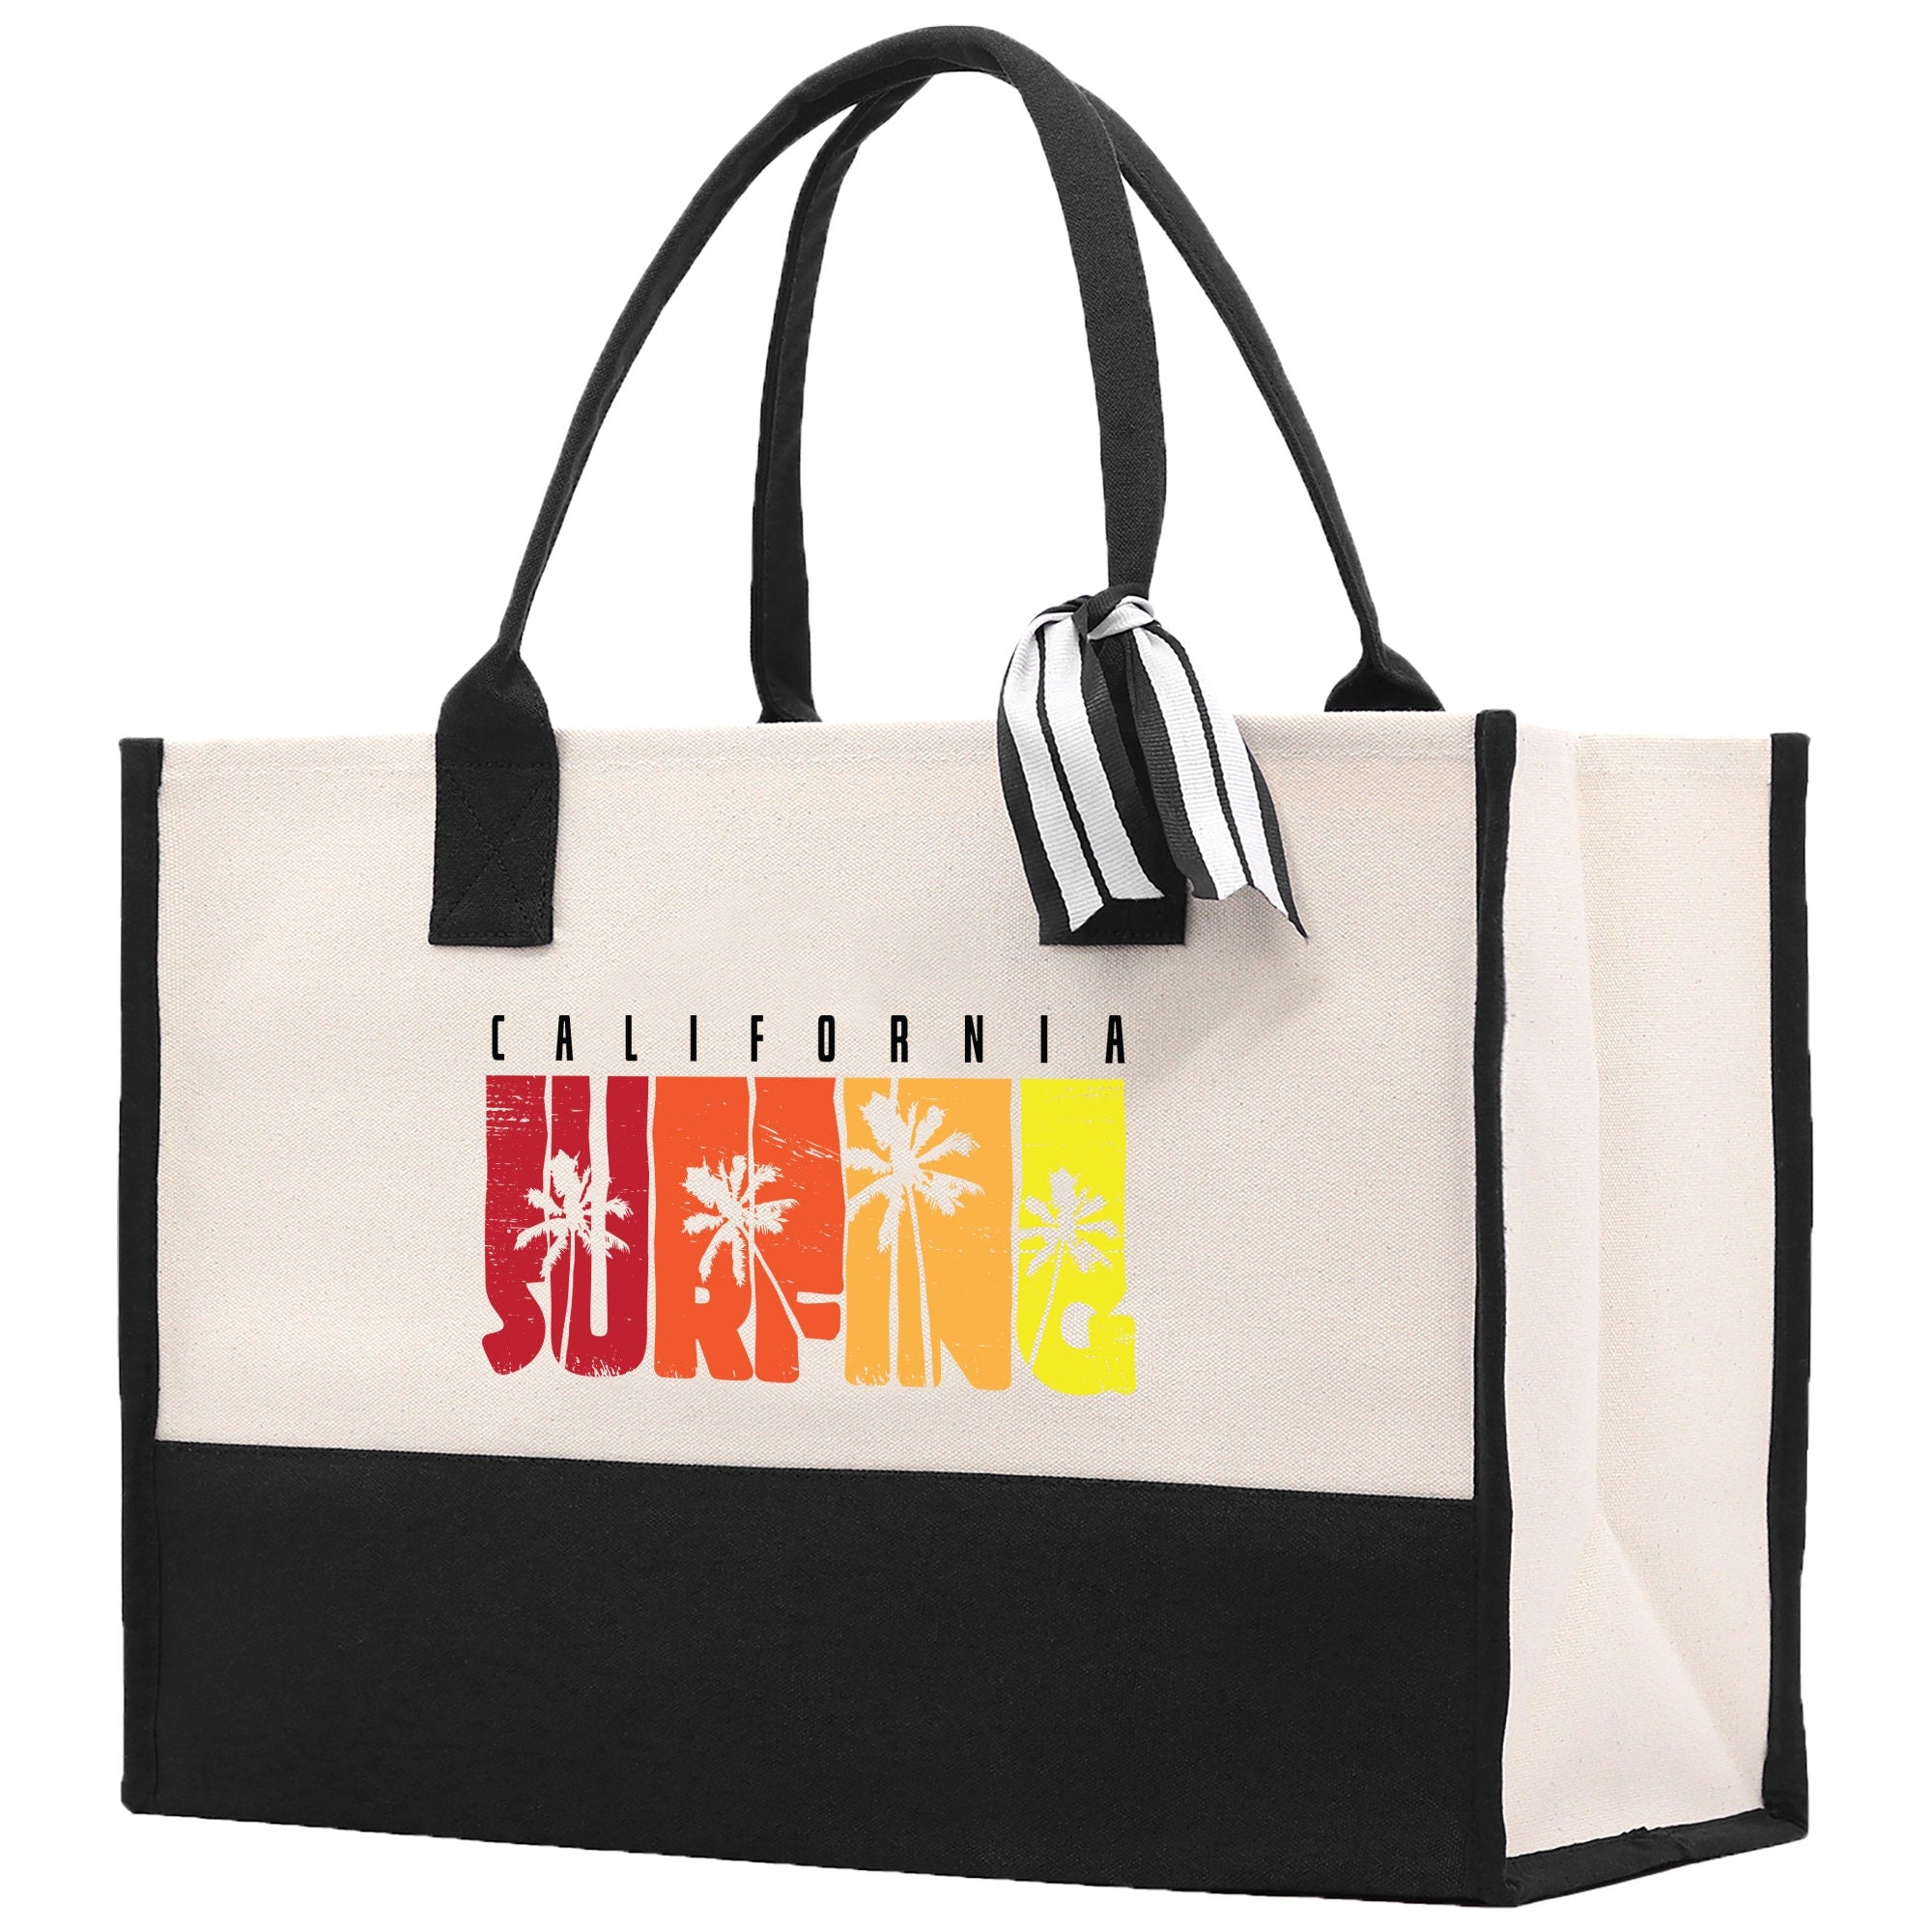 California Cotton Canvas Tote Bag CA Travel Vacation Tote Employee and Client Gift Wedding Favor Birthday Welcome Tote Bag Bridesmaid Gift